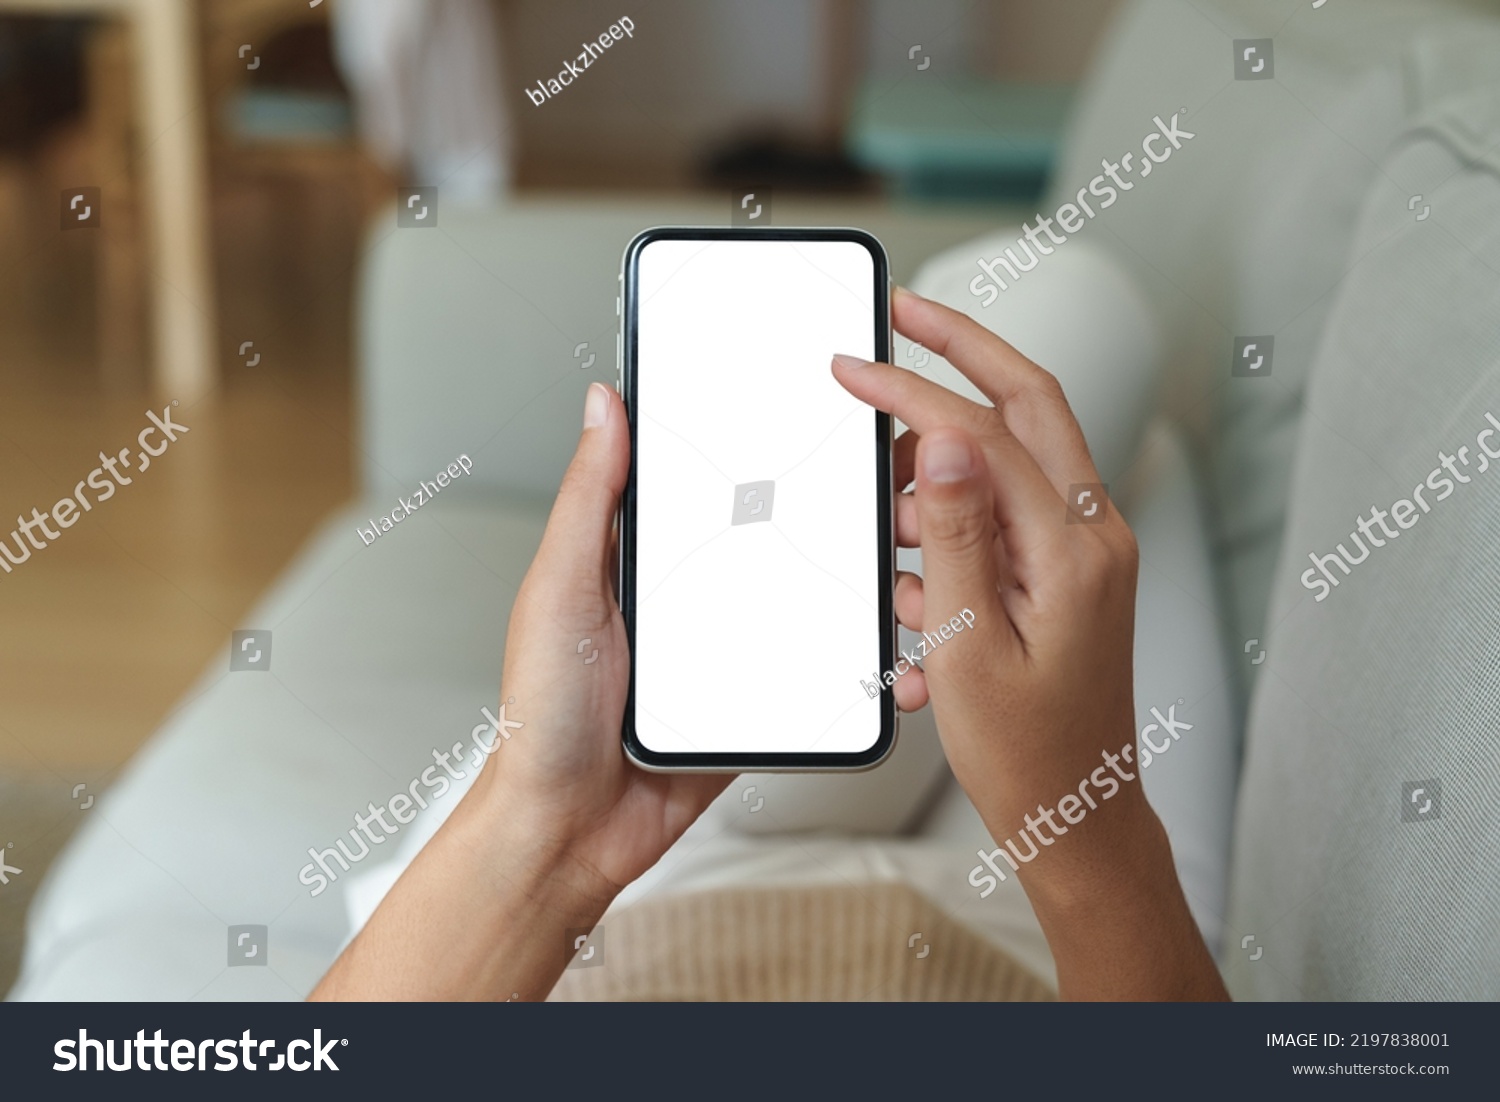 close-up hand using phone showing white screen in living room #2197838001